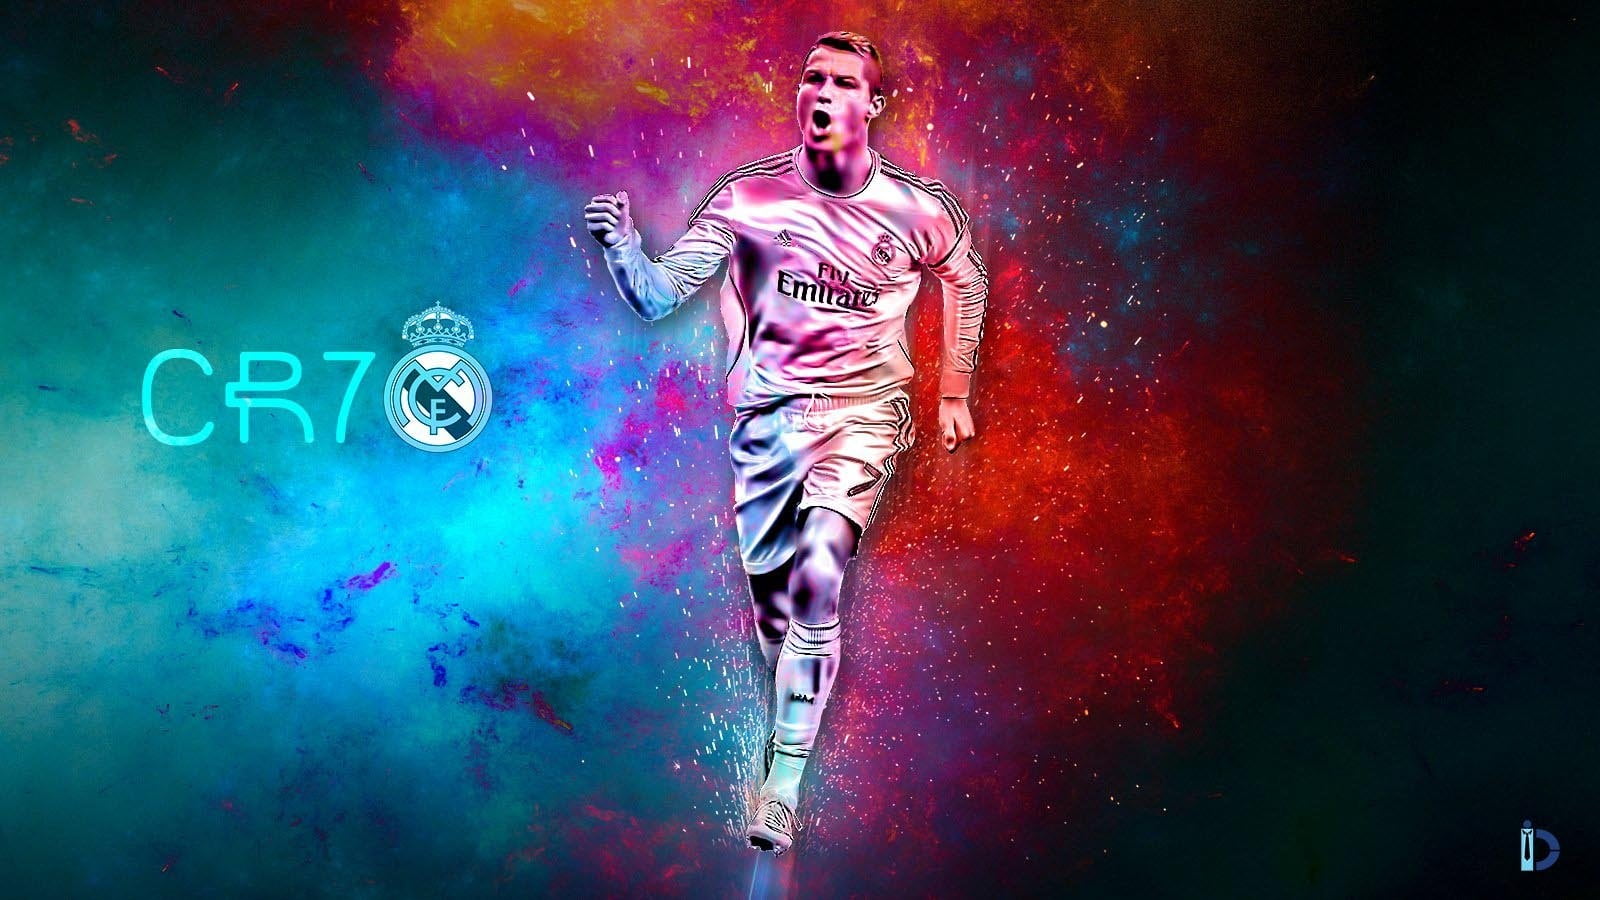 cr7 wallpaper,football player,graphic design,performance,font,space